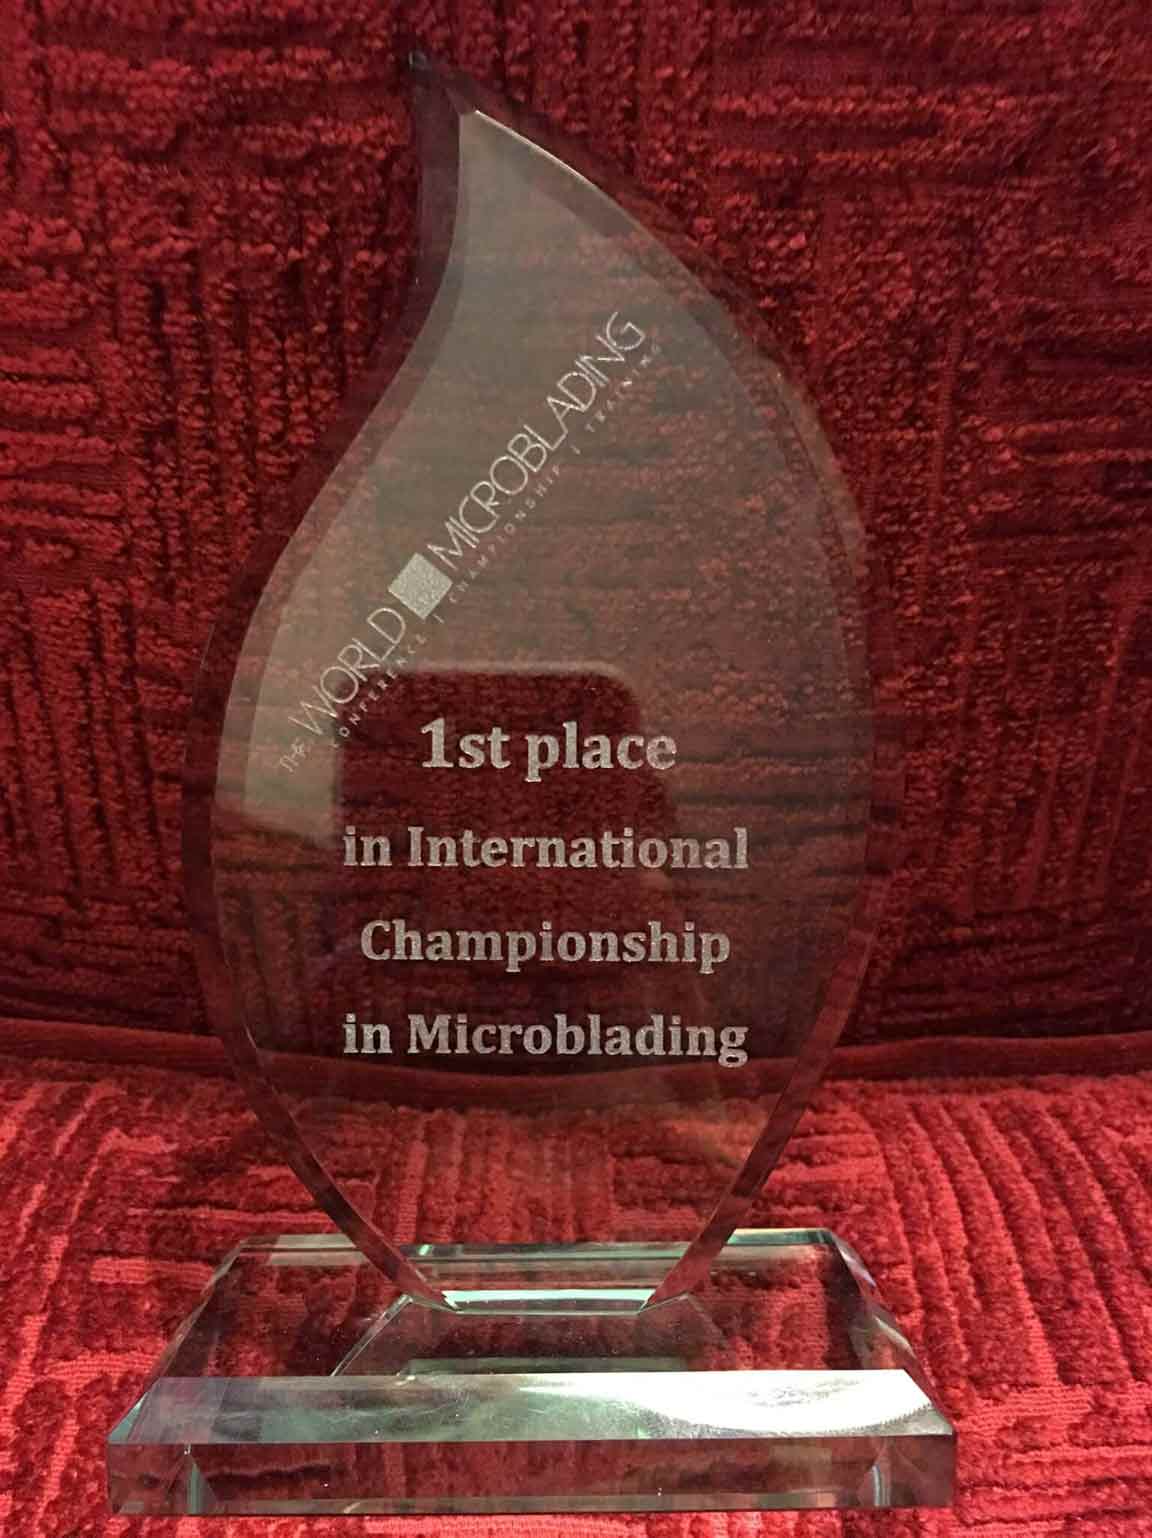 The World of Microblading Champion trophy, awarded to 1st Place Winner Lindsey Ta